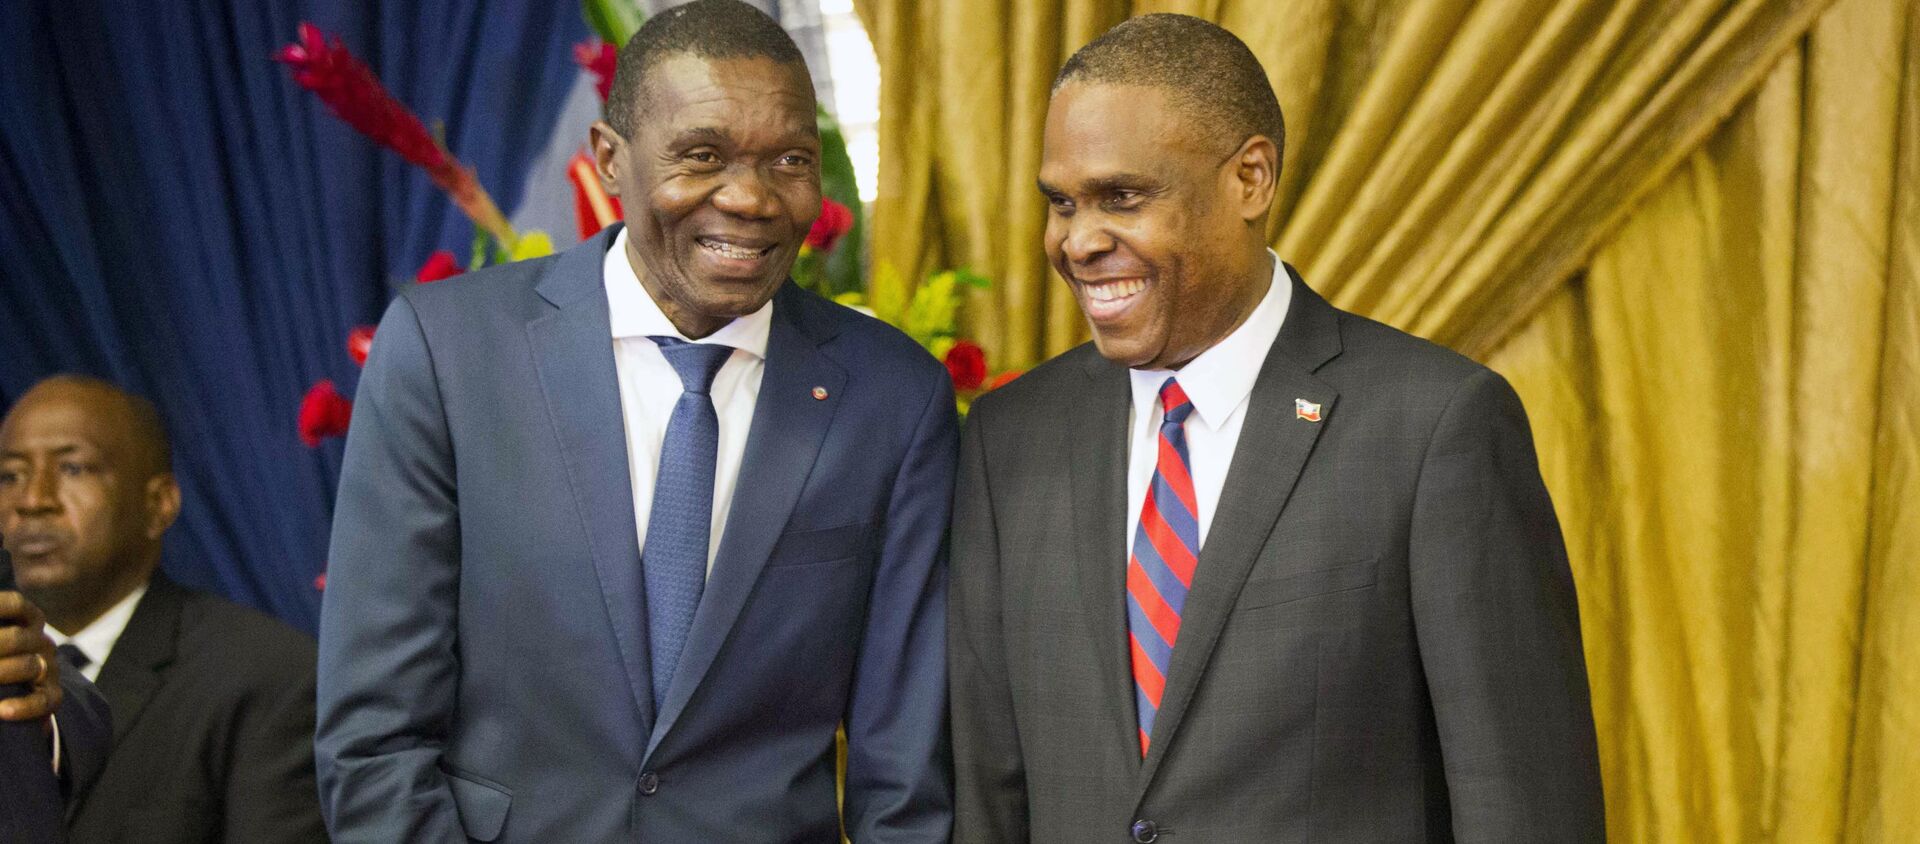 Haiti's new prime minister Jean-Henry Ceant, right, talks to Senate President Joseph Lambert during the nomination ceremony at the national Palace in Port-au-Prince, Haiti, Tuesday, Aug. 7, 2018.  - Sputnik International, 1920, 09.07.2021